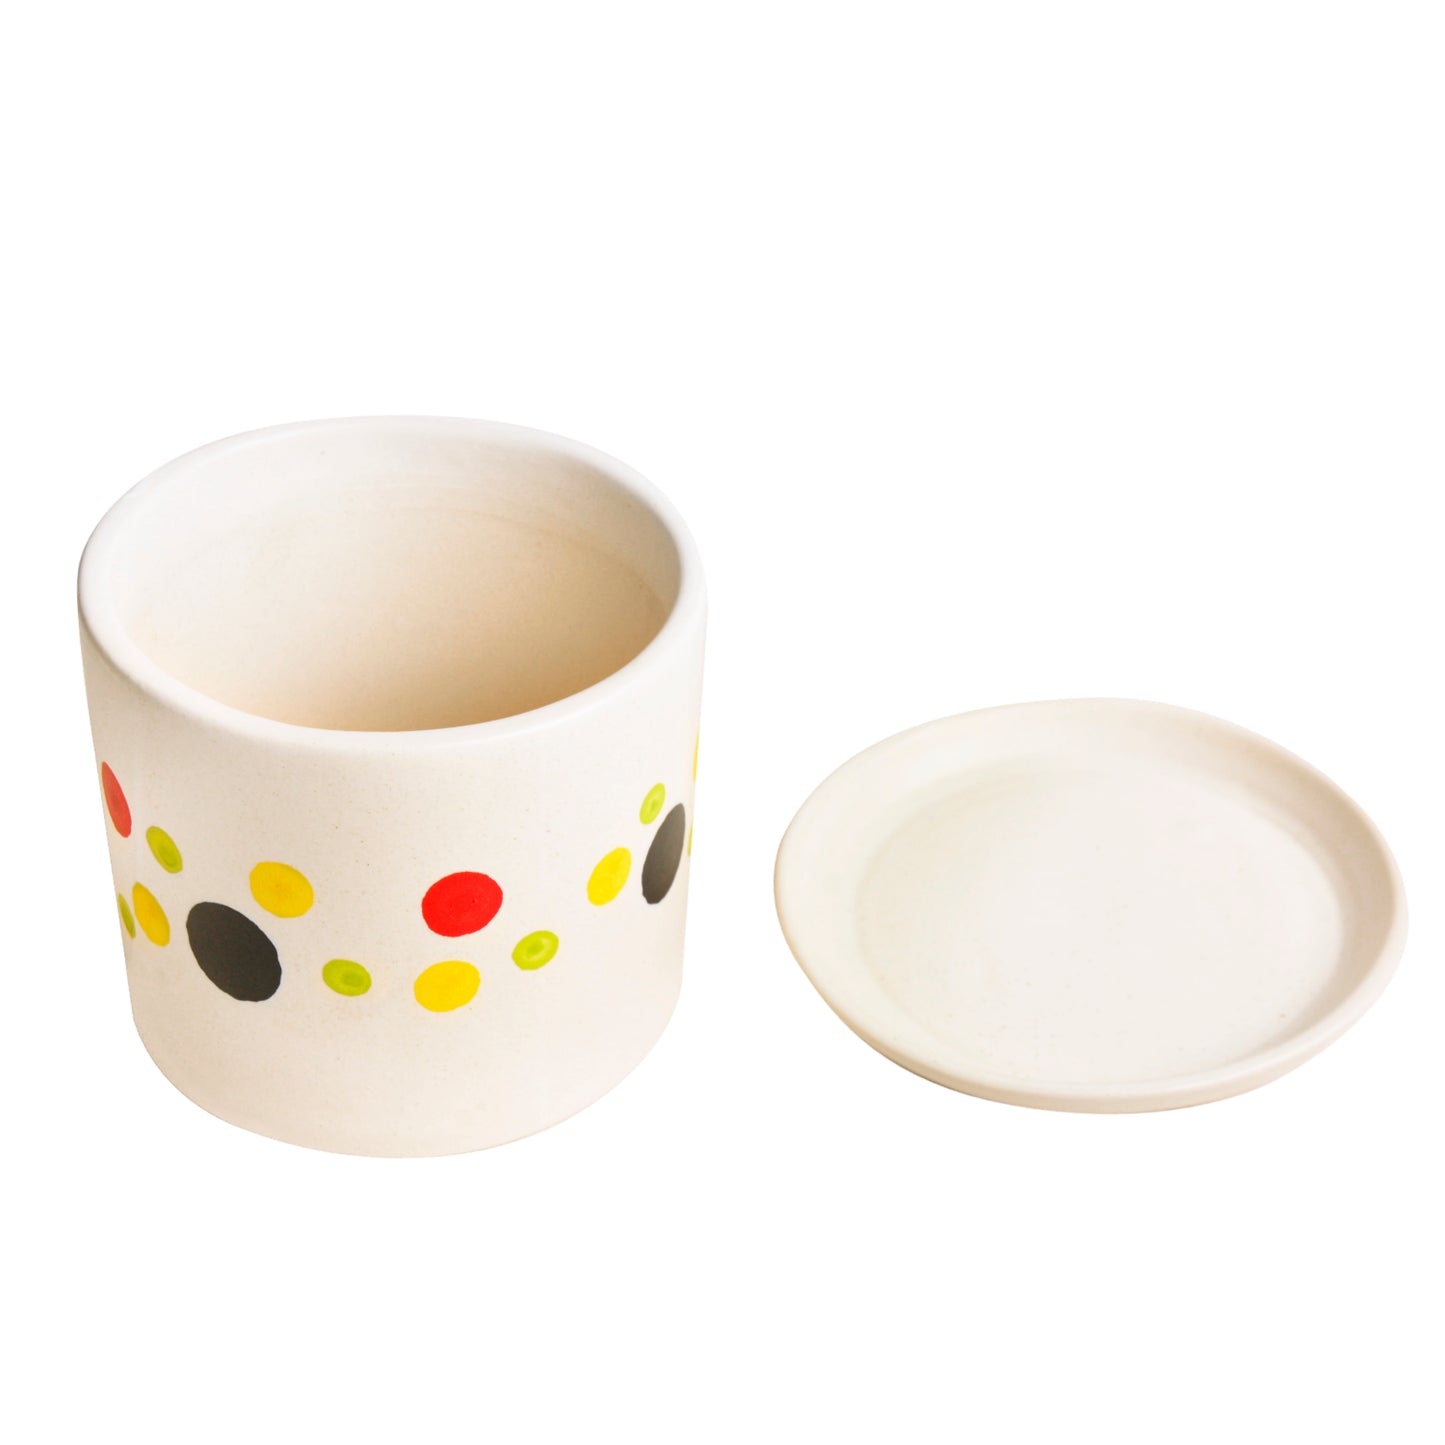 Hand Painted Ceramic Round Polka Dot Planter Pot with Tray (Multicolor and Off White, Diameter – 11.5 cm, Height – 10.5 cm)